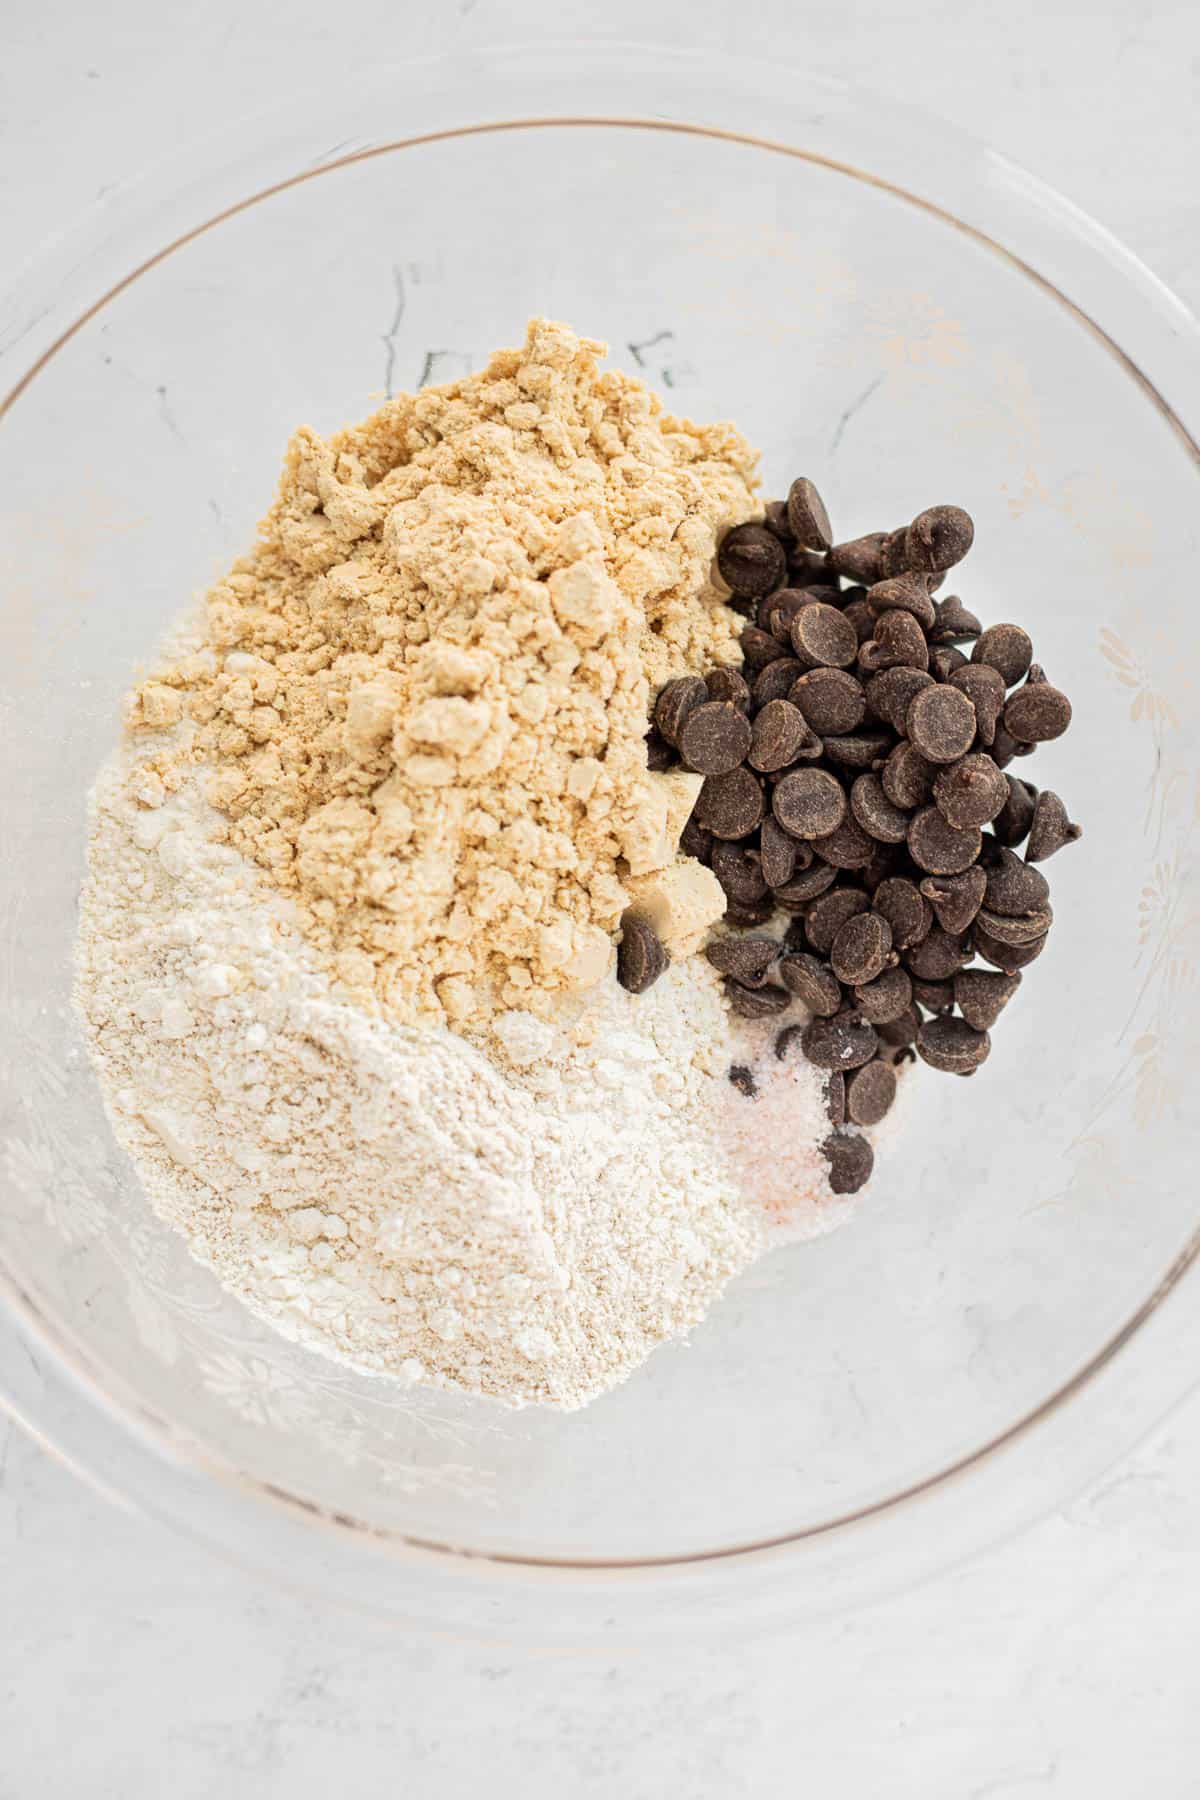 flour, protein powder, chocolate chips, and salt in a glass bowl.